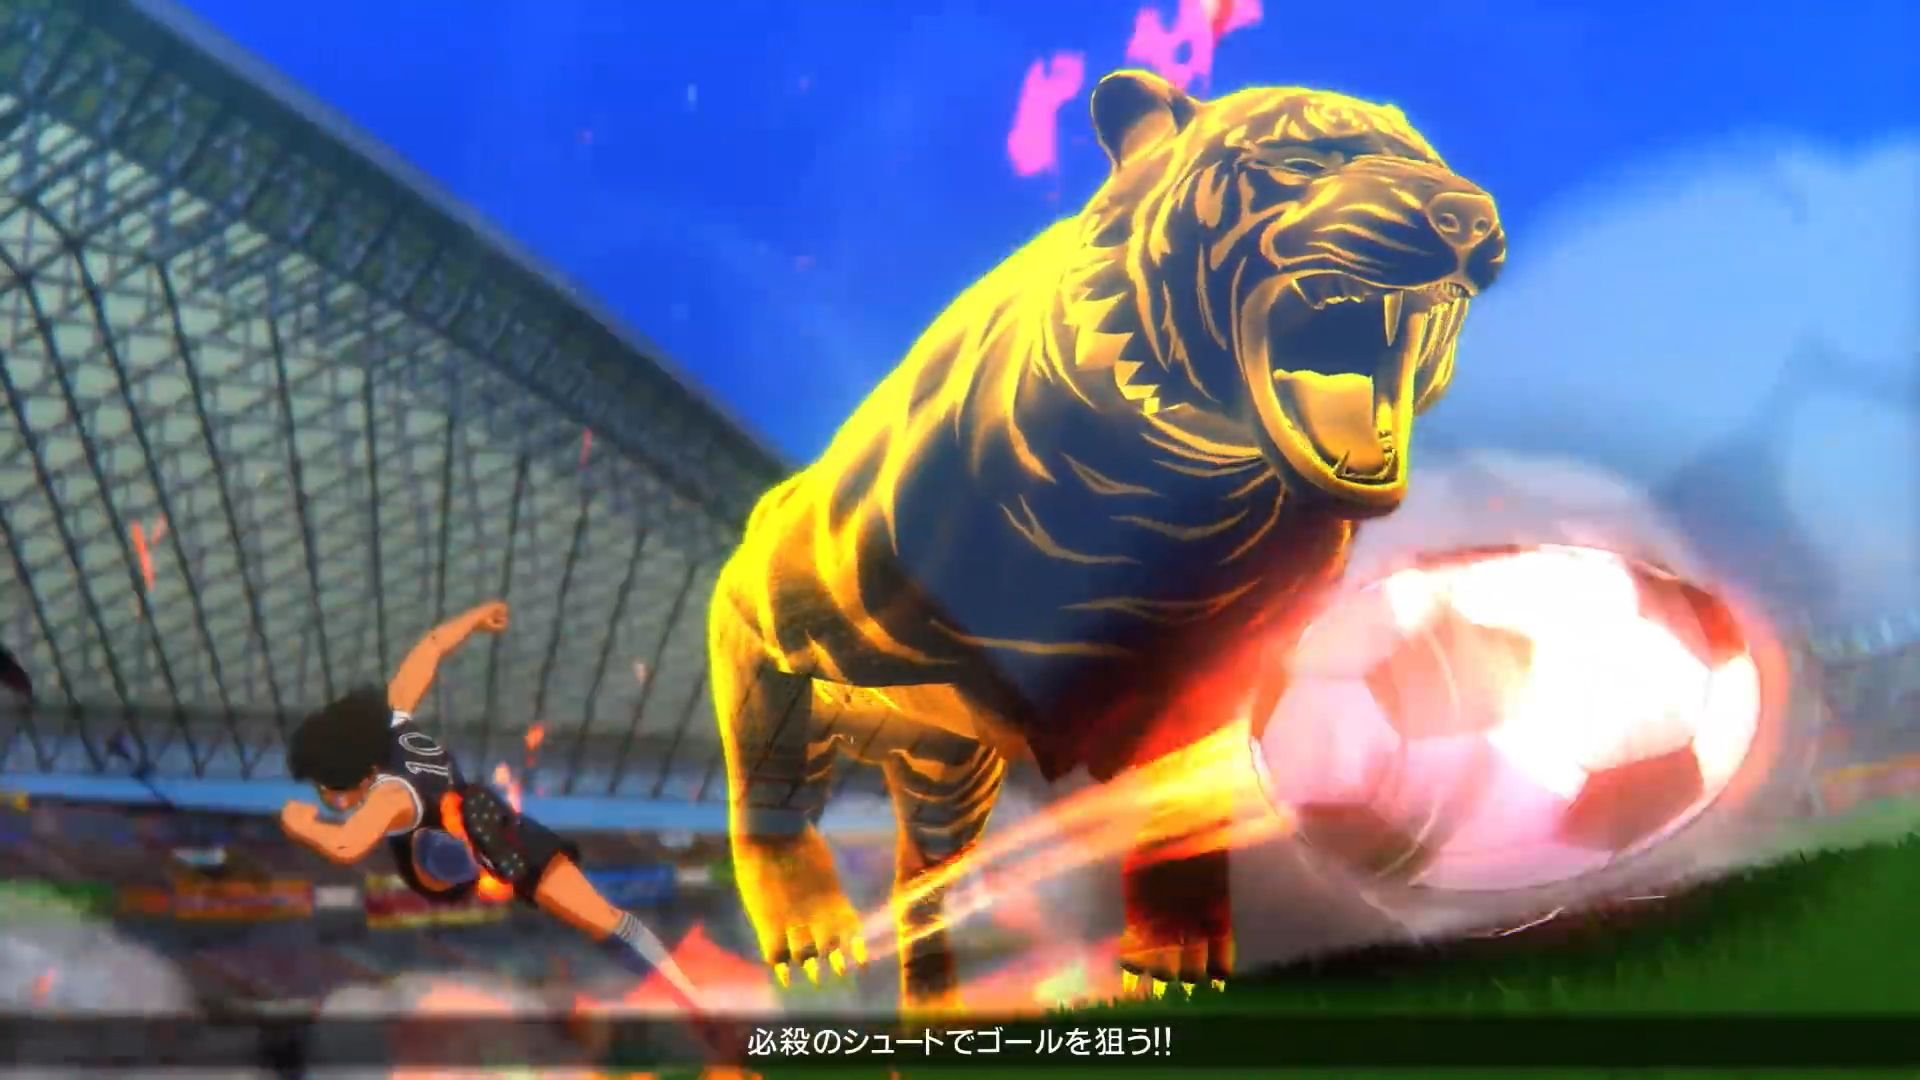 Trailer: 8 Minutes Of Shaolin Soccer Gameplay! I Meant. Captain Tsubasa: Rise Of New Champions